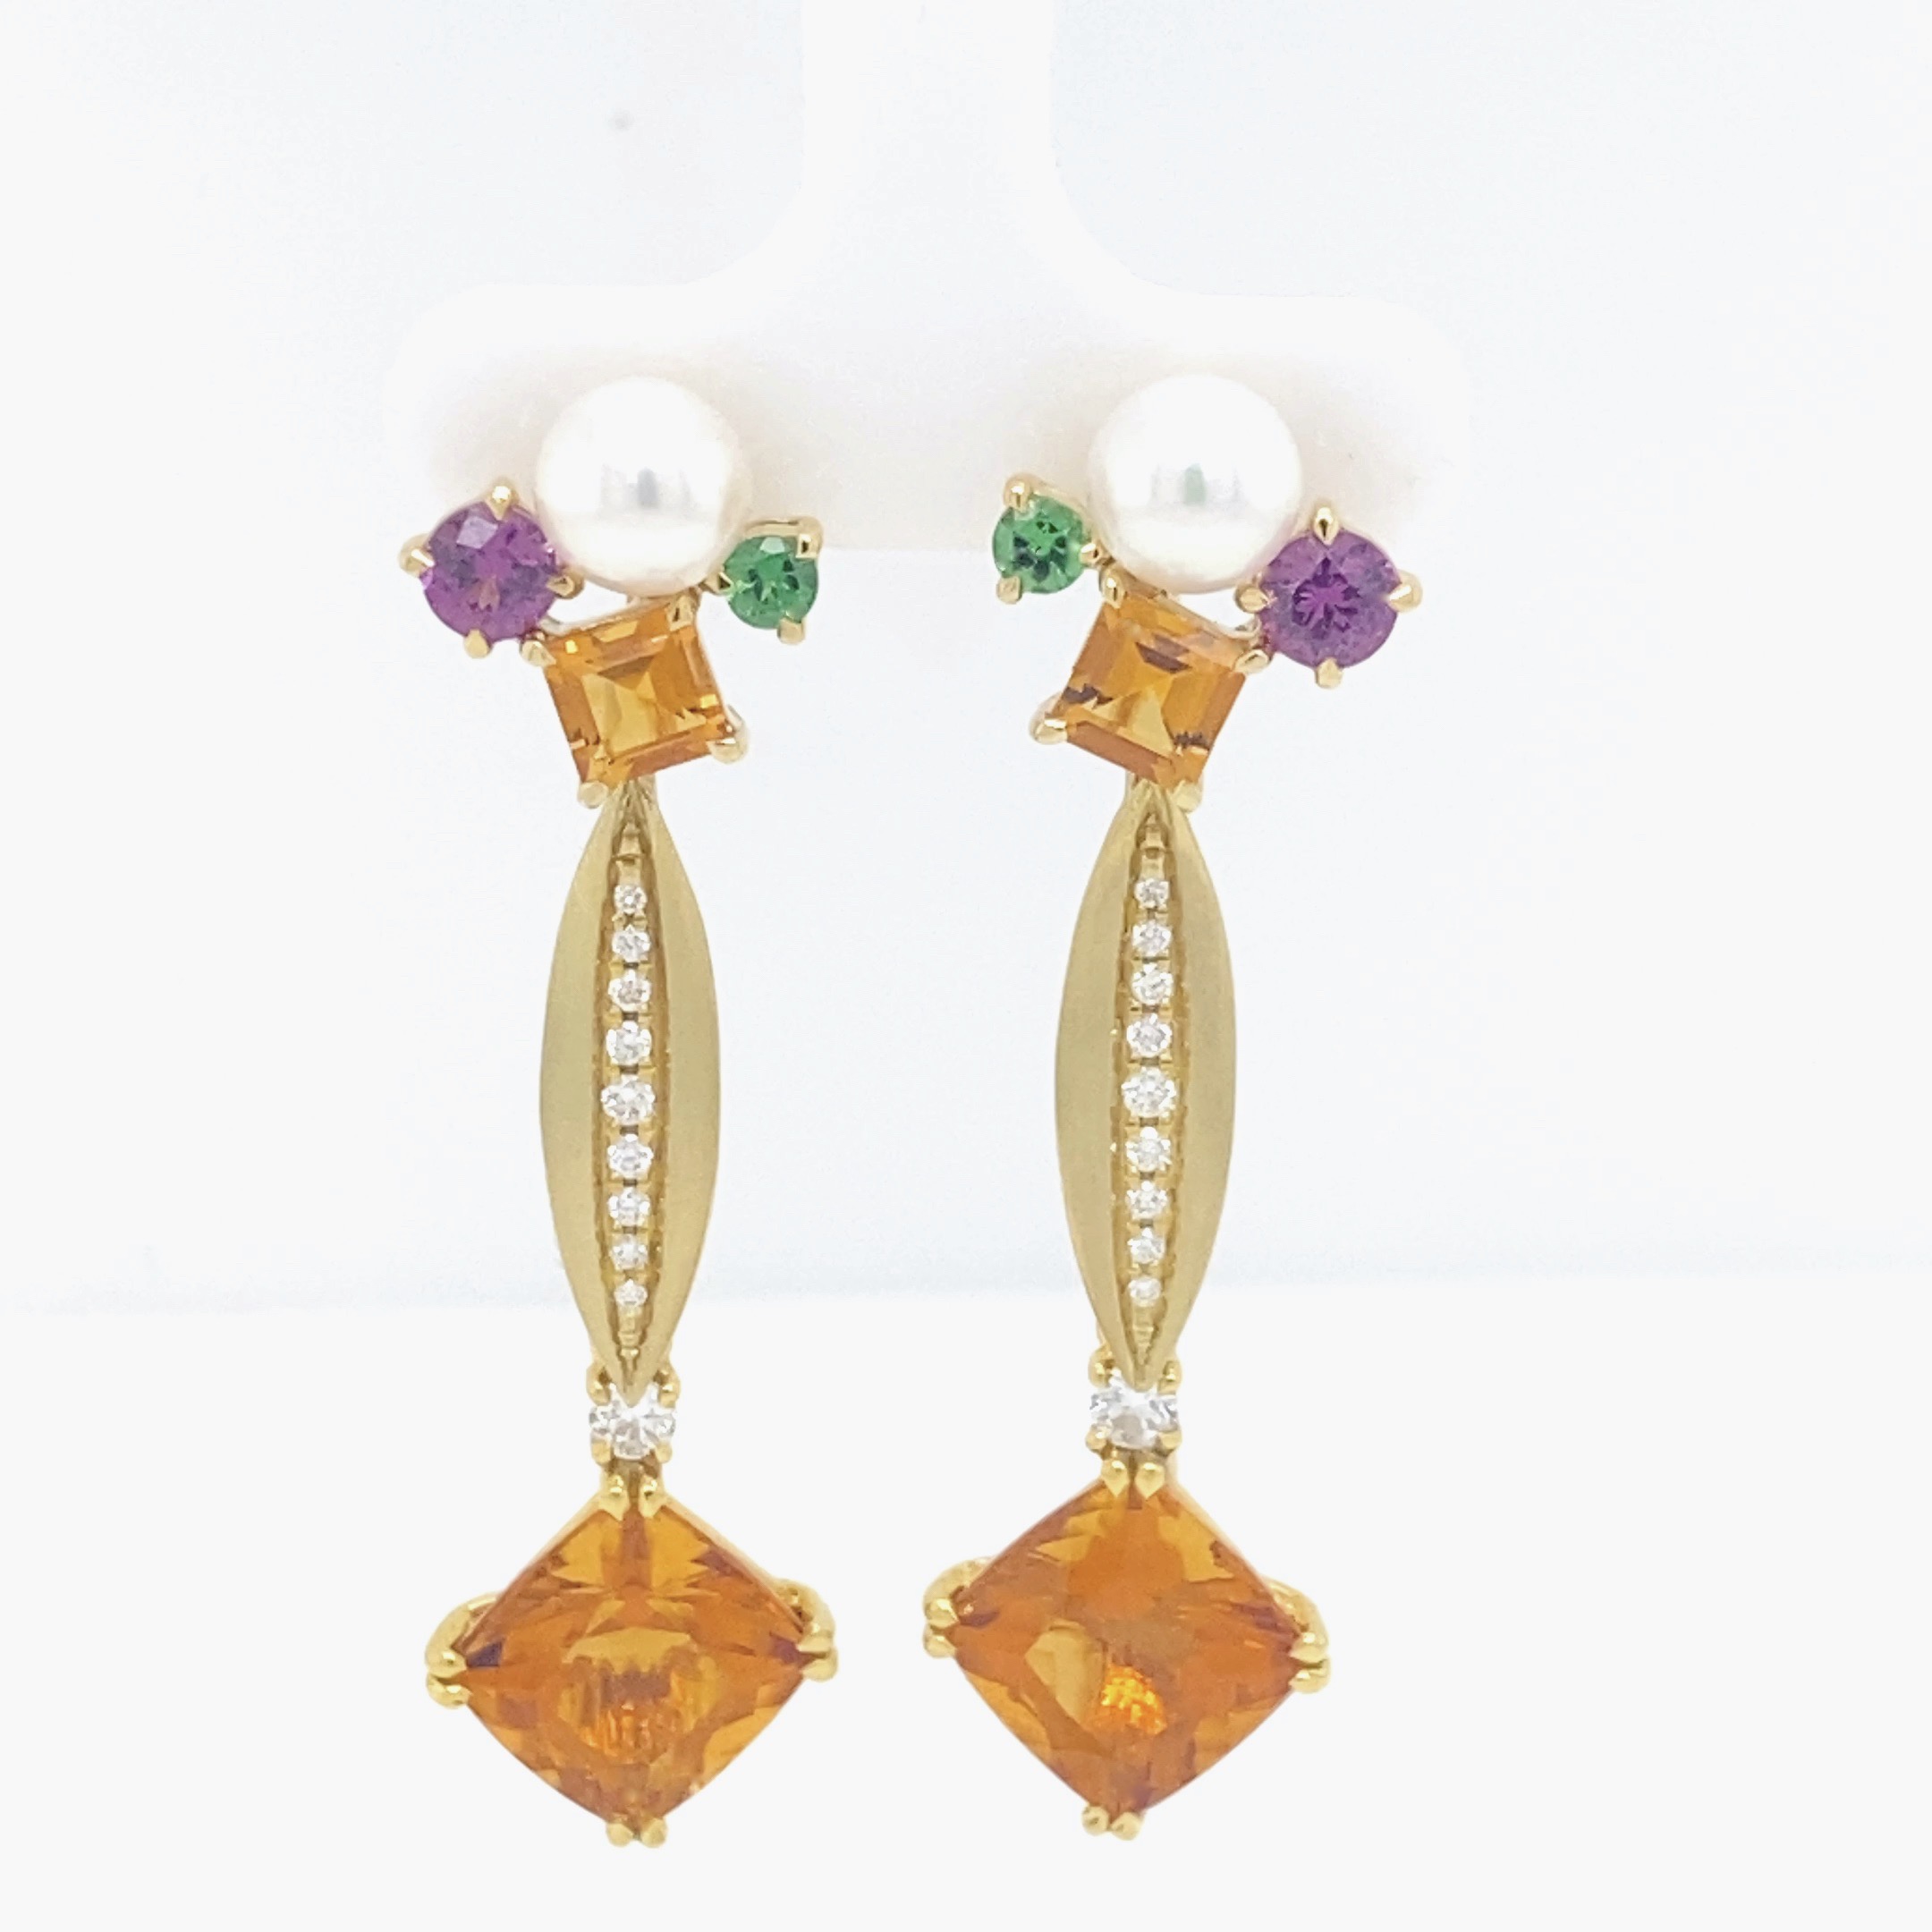 Scintilla earring with Citrine, Spessartine Garnet and Tsavorite Garnet and Pearl with square Citrine Gem Drops and Peapod Bridge